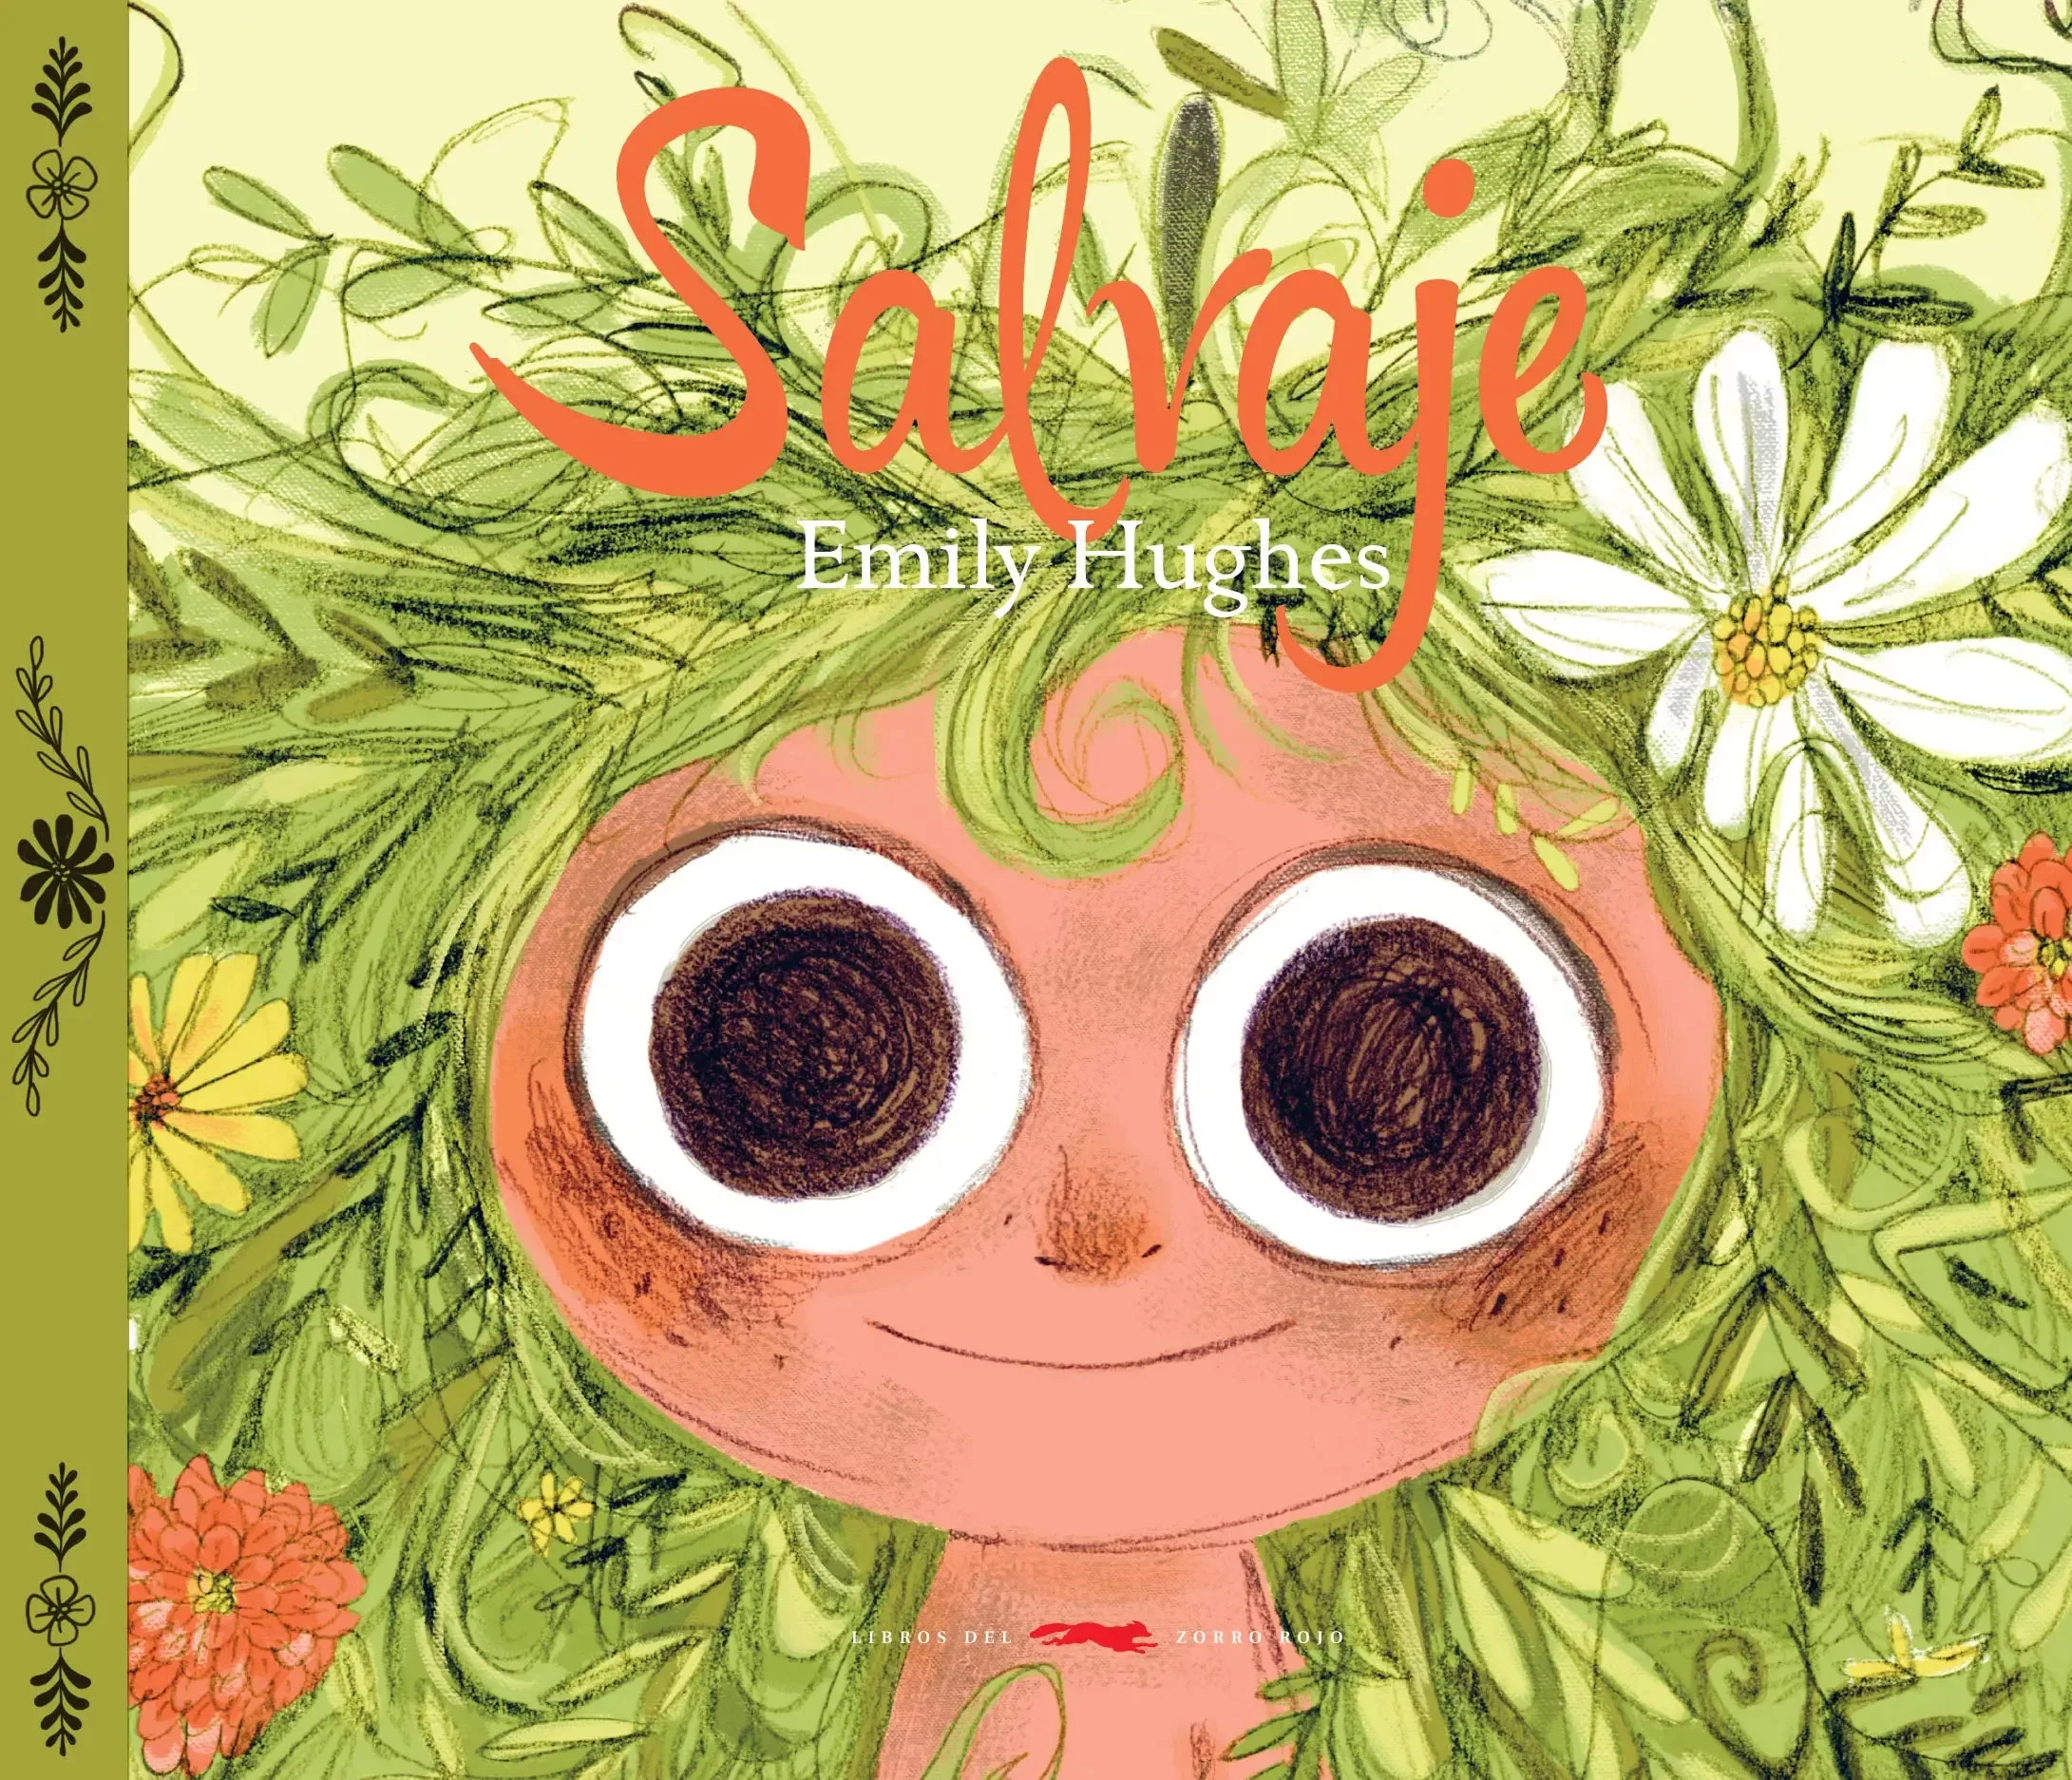 Cover of Salvaje, Spanish edition of Wild by Emily Hughes